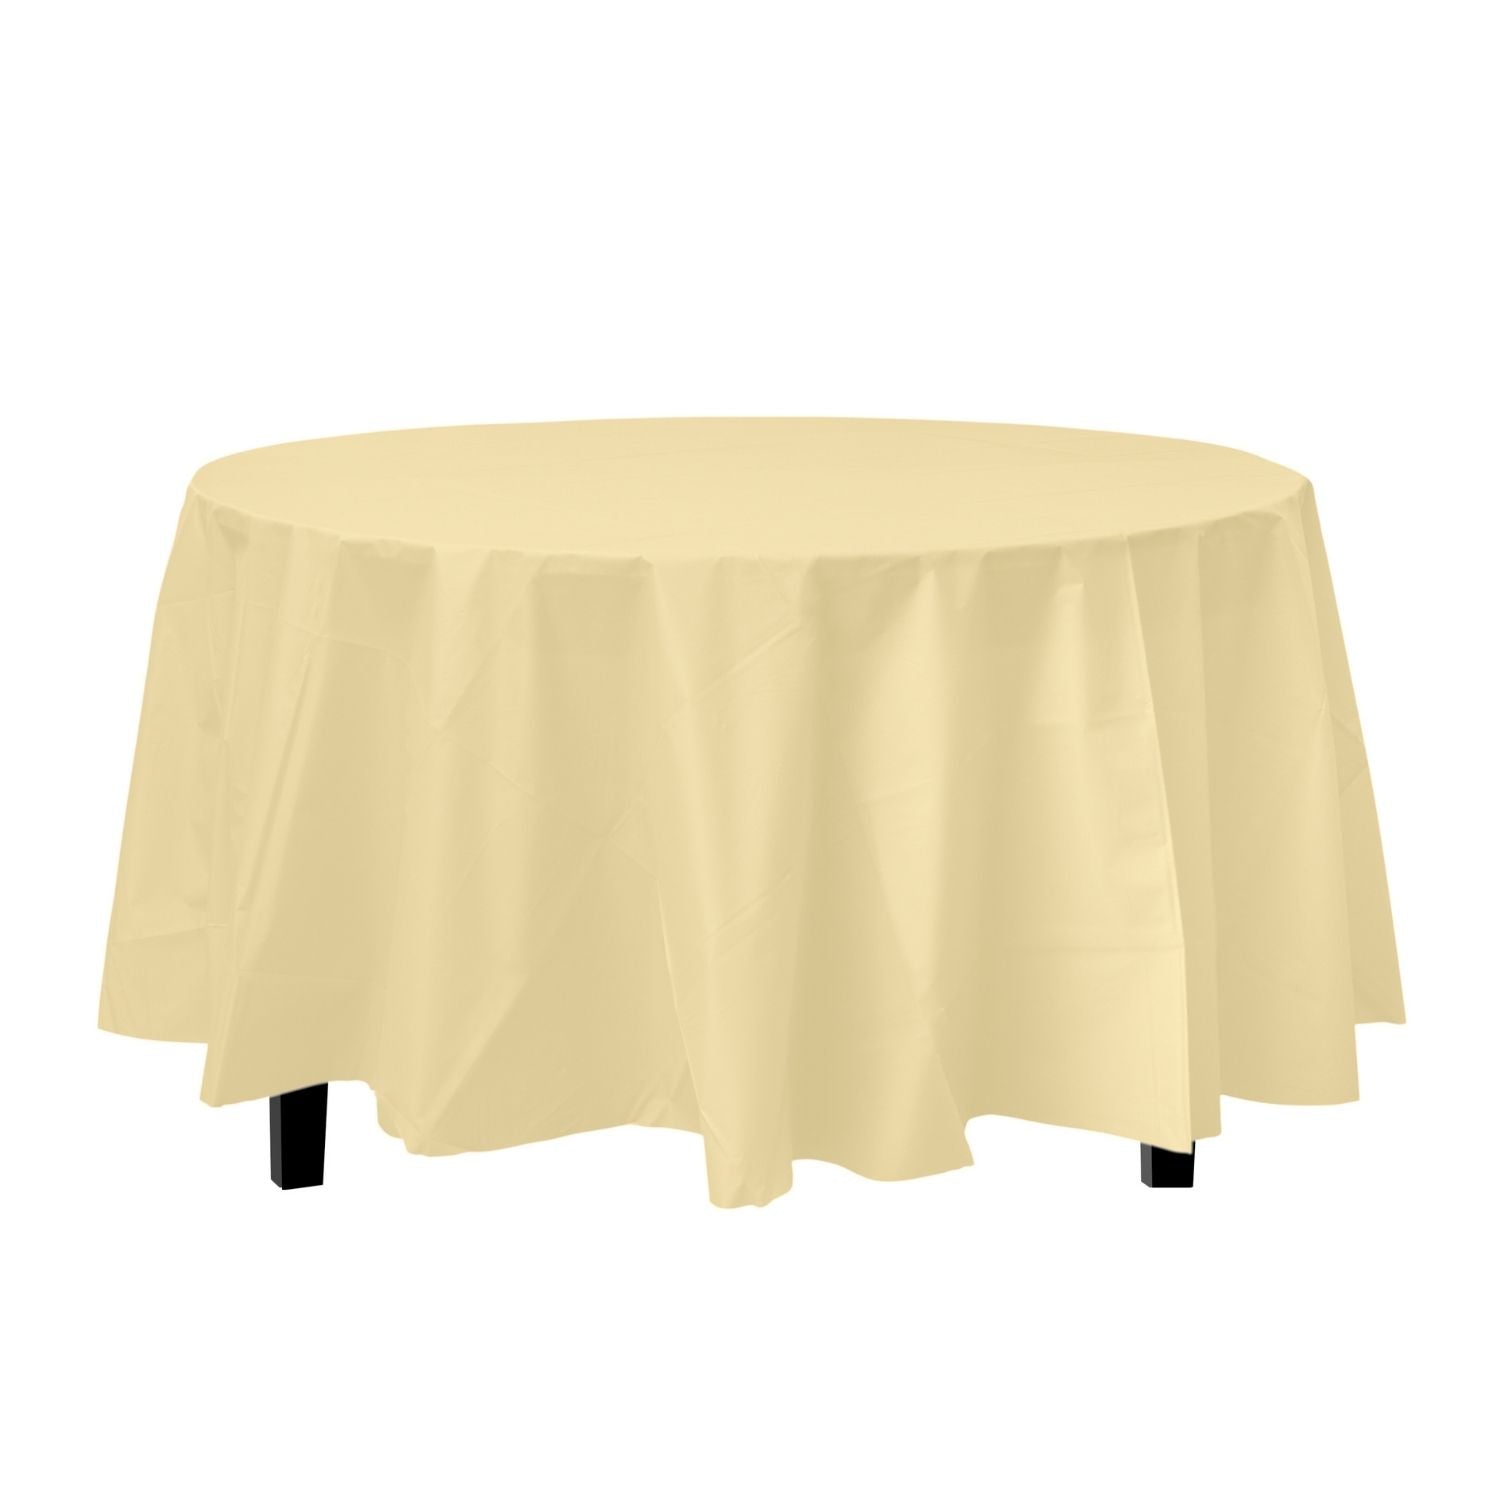 Light Yellow Round Plastic Tablecloth | 48 Count